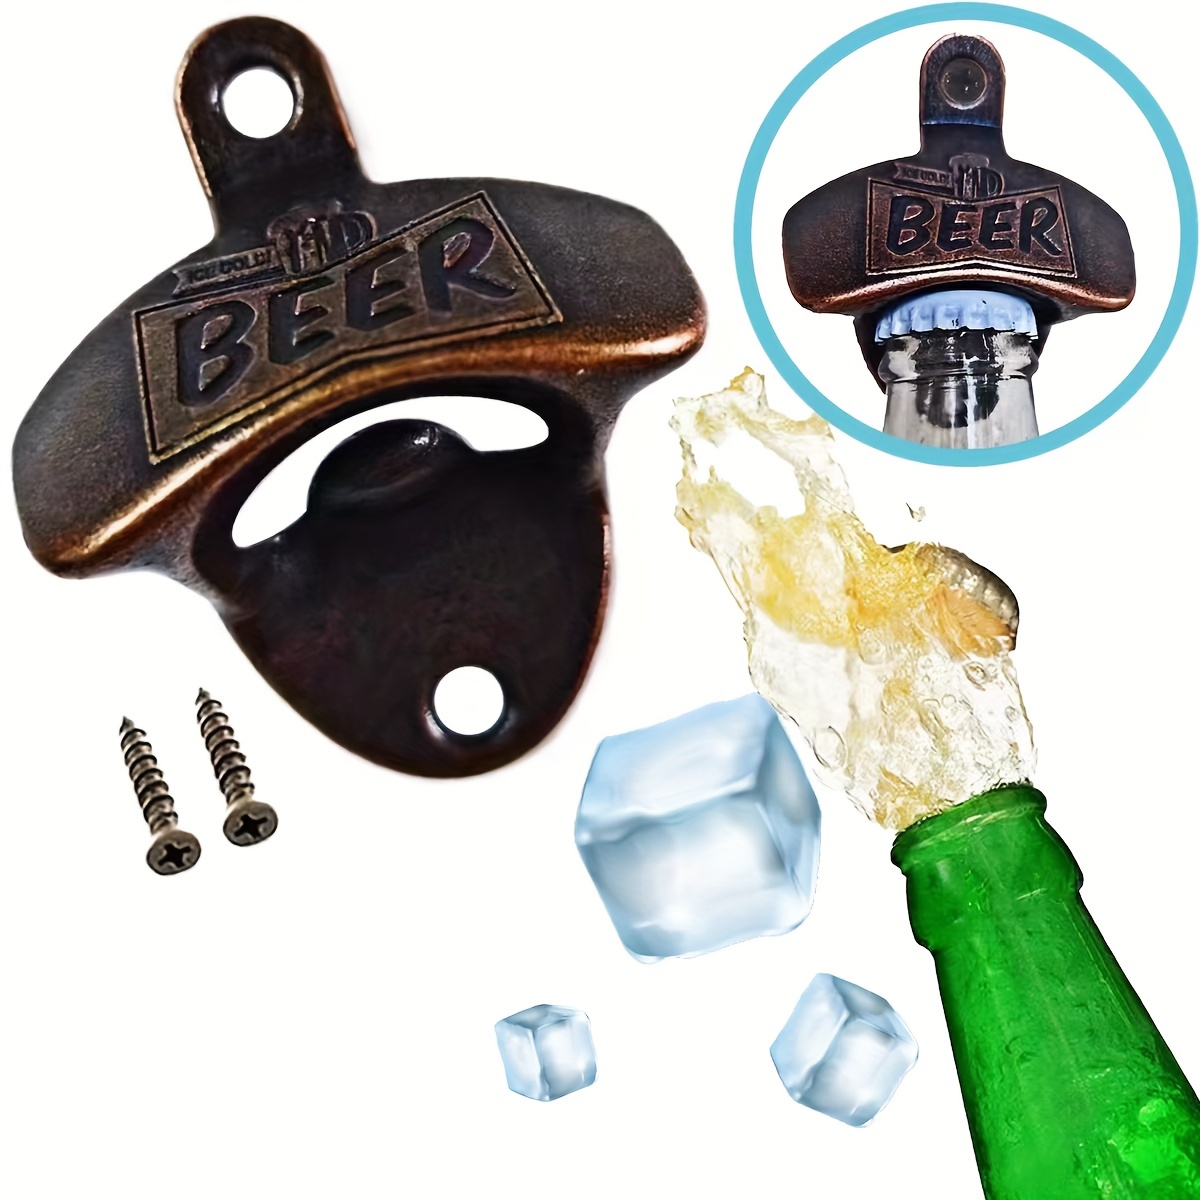 1pc, Retro Bottle Opener, Wall Mounted Vintage Metal Ice Cold Beer Opener,  Wall Decorative Beer Opener For Bar, Pub, BBQ, Home Bar, Kitchen Gadgets, B